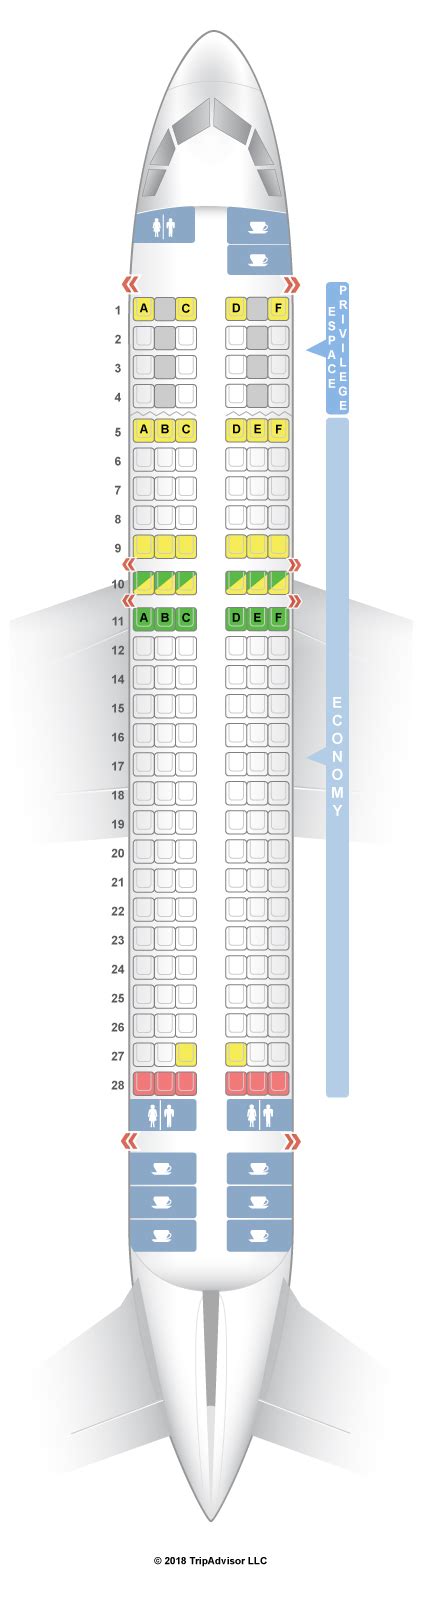 Airbus A320 200 Seating Plan Lufthansa Cabinets Matttroy